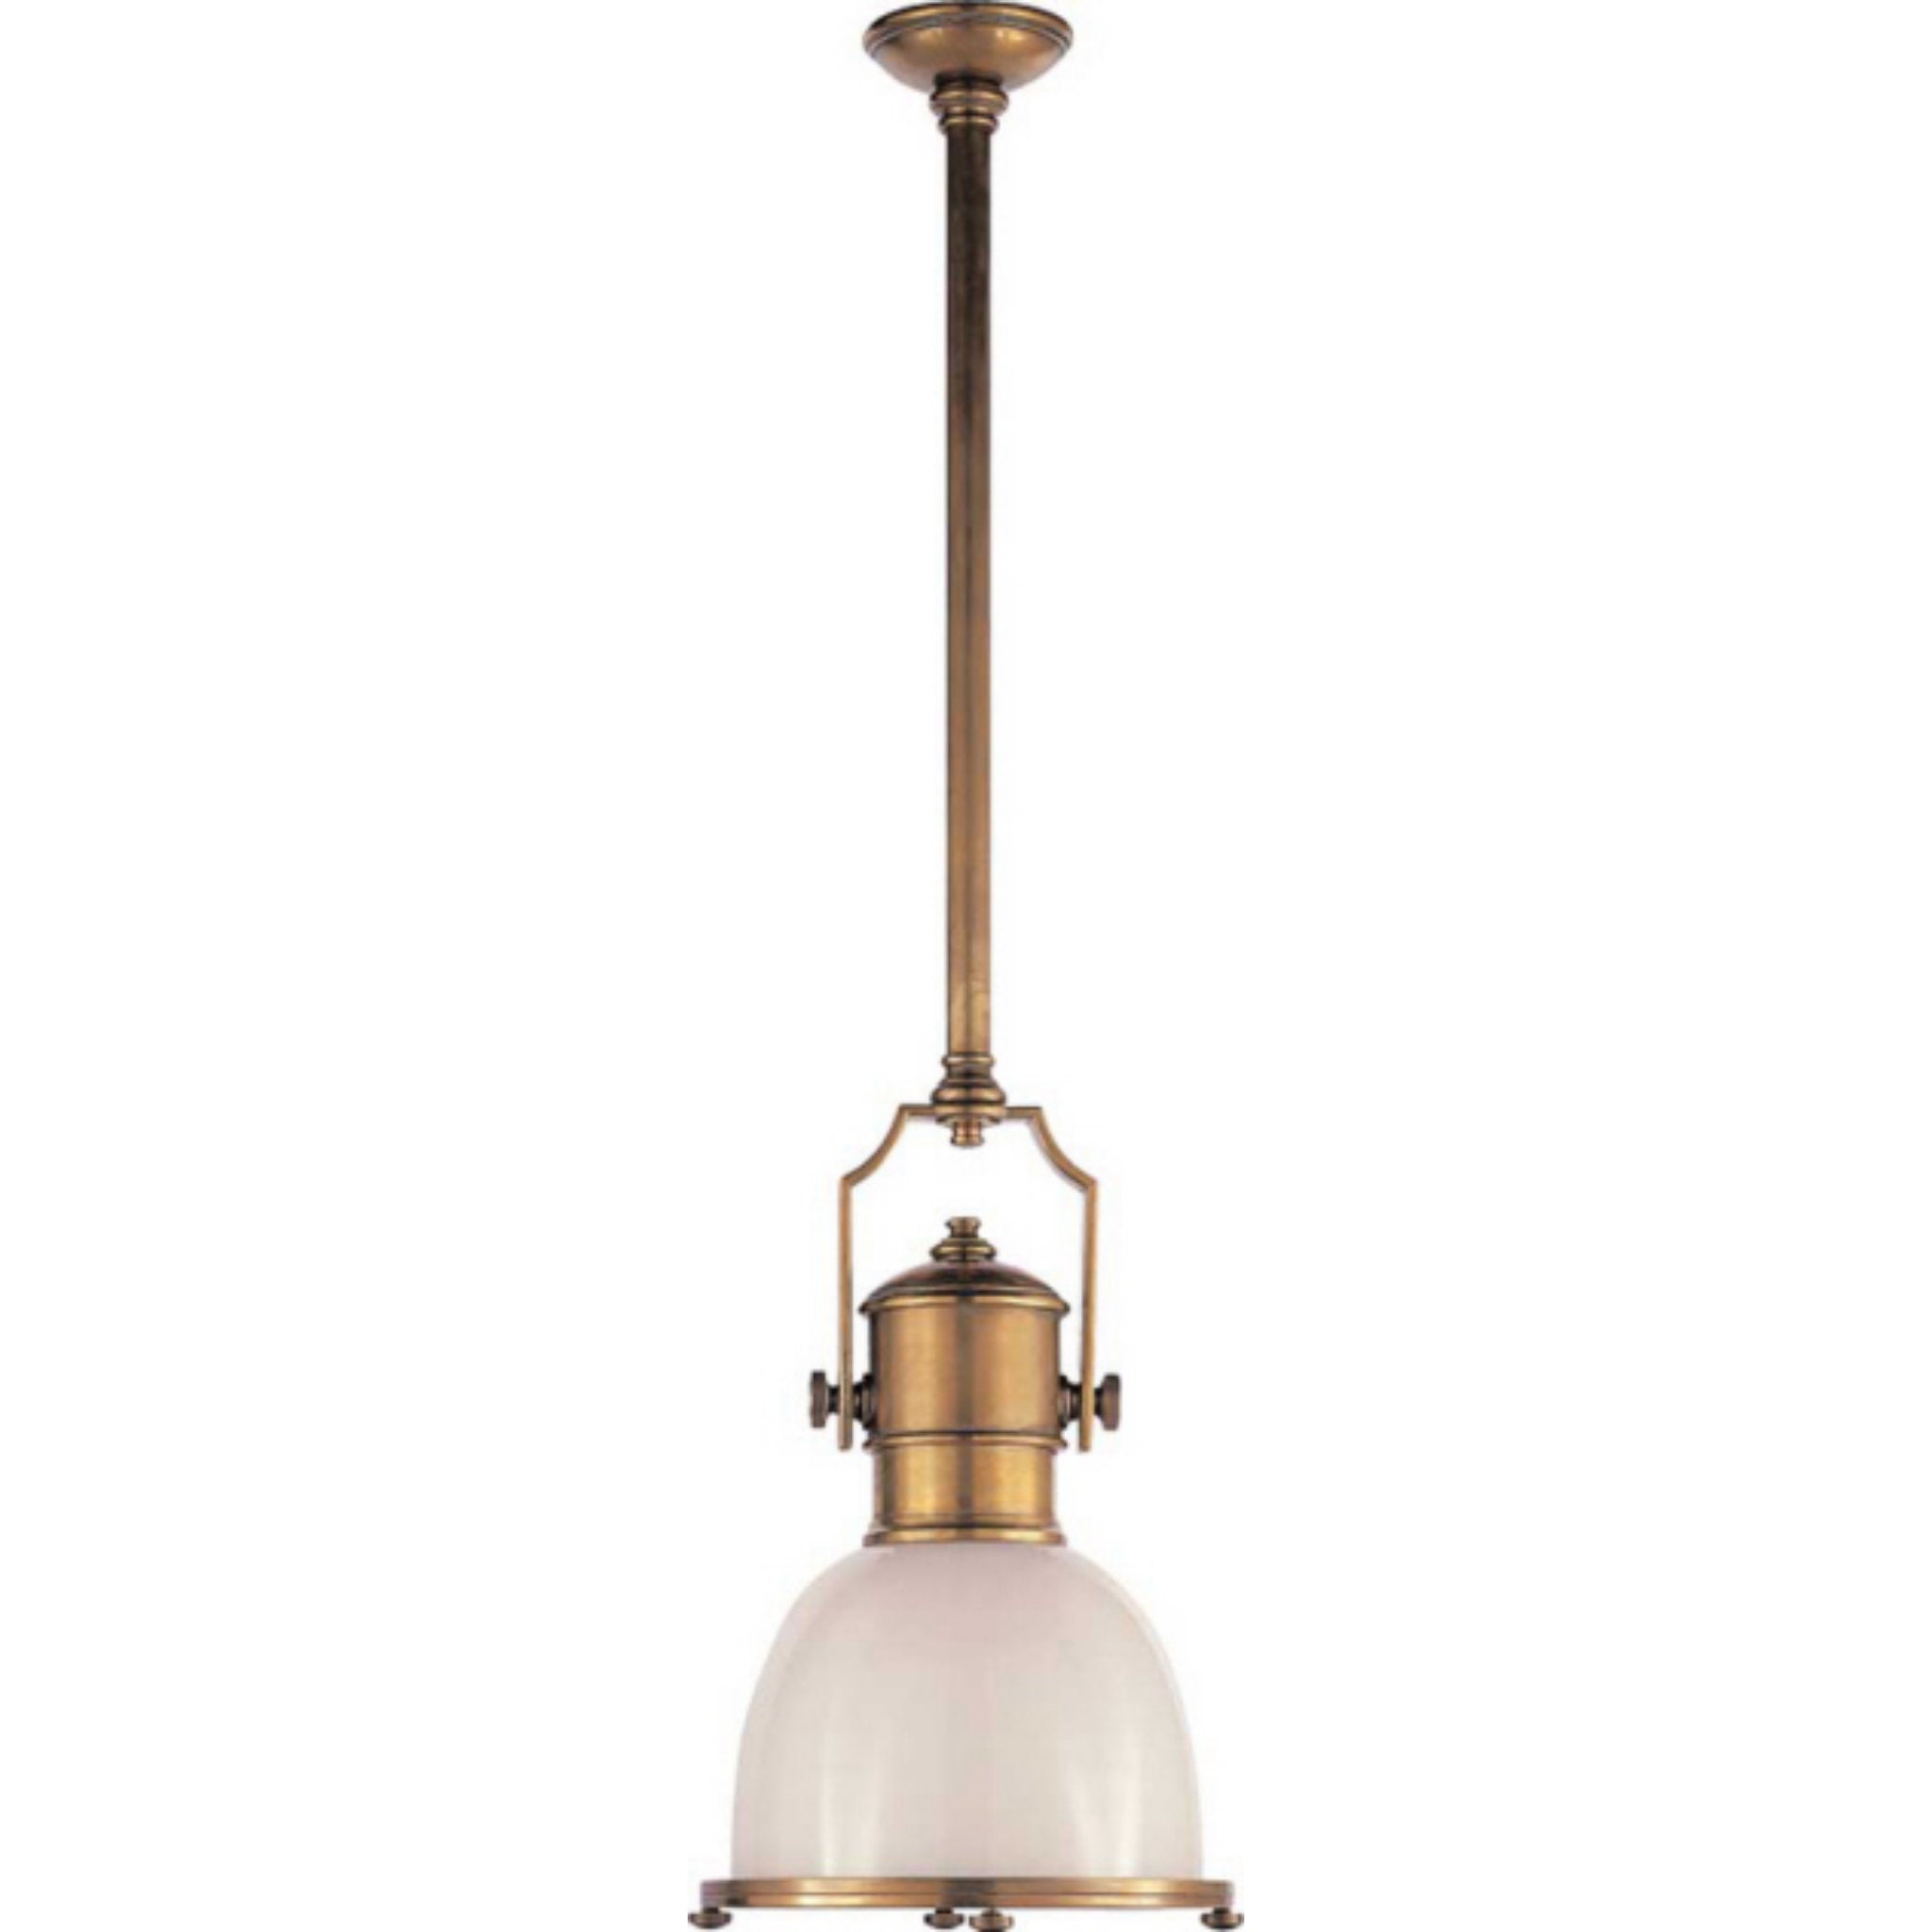 Chapman & Myers Country Industrial Small Pendant in Antique-Burnished Brass with White Glass Shade